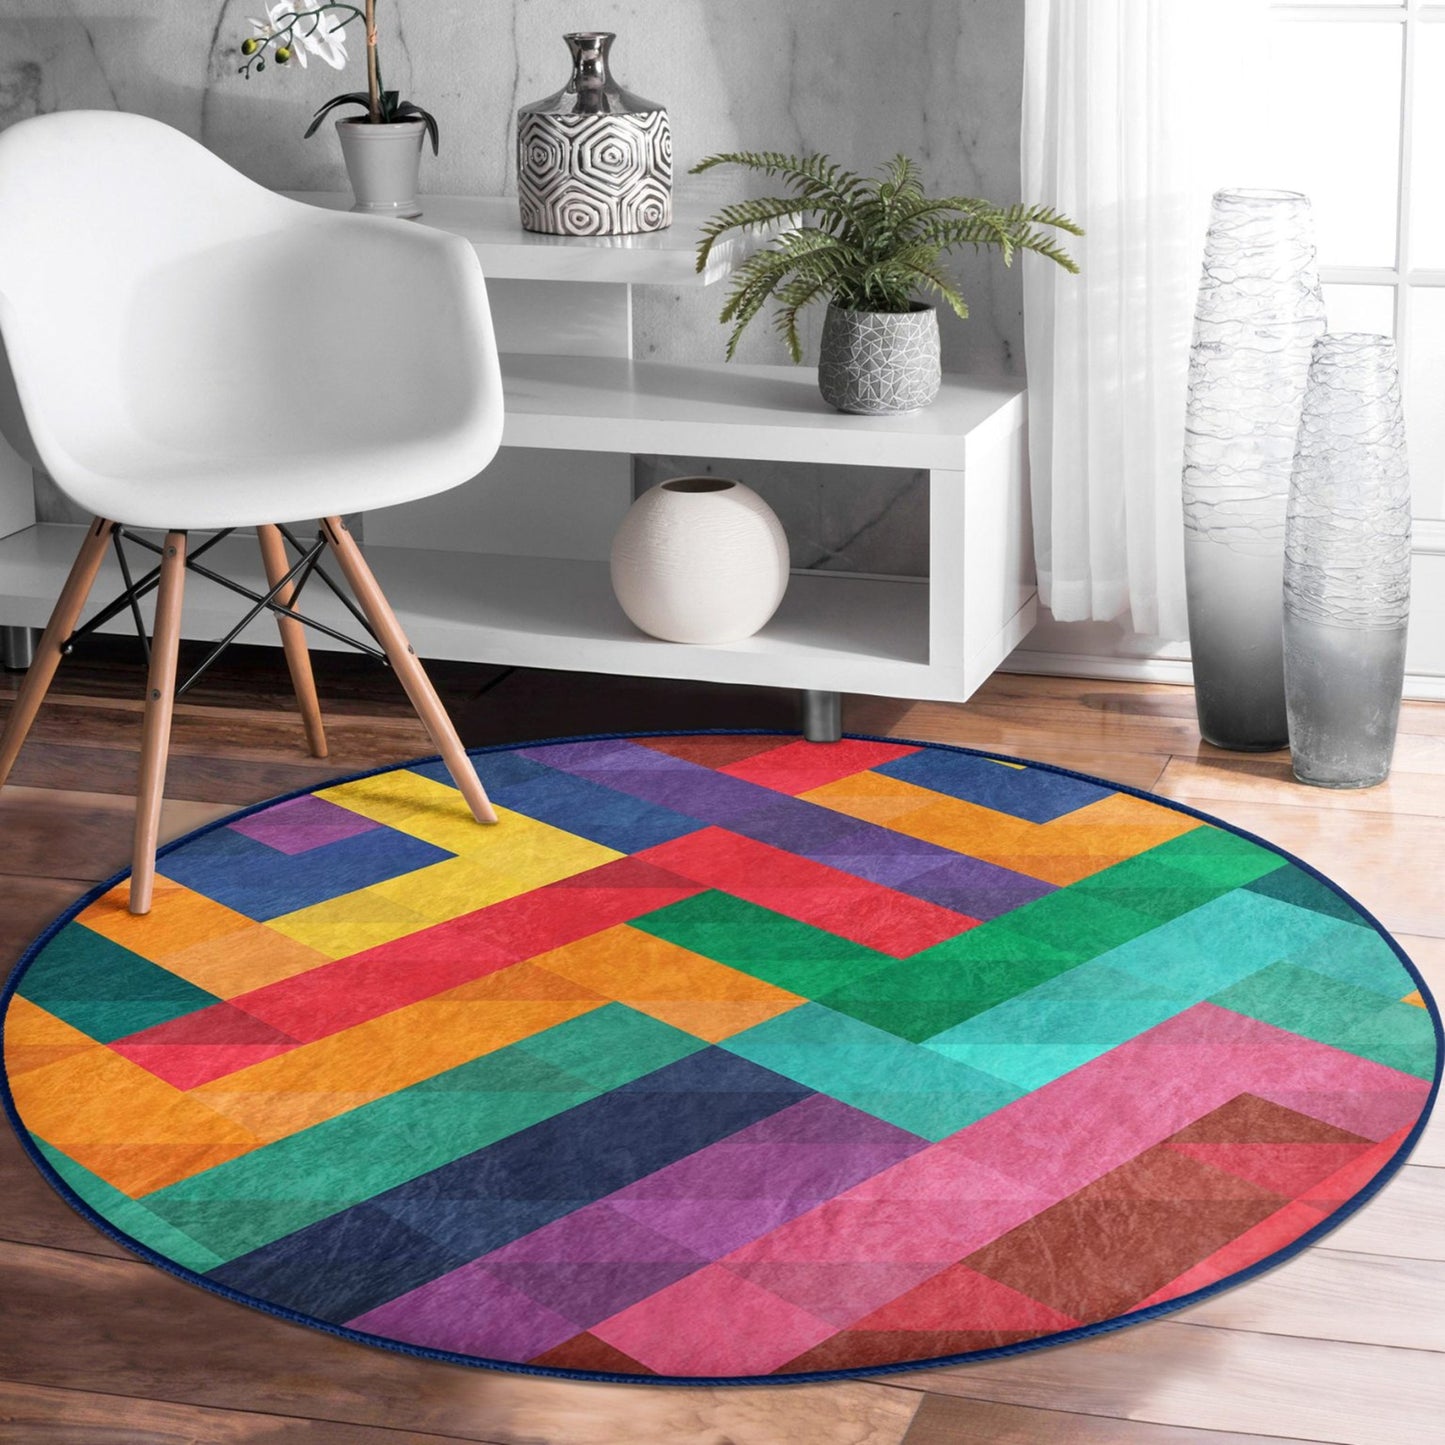 Vibrant Rainbow Colors Patterned Circle Carpet - Cheerful Design